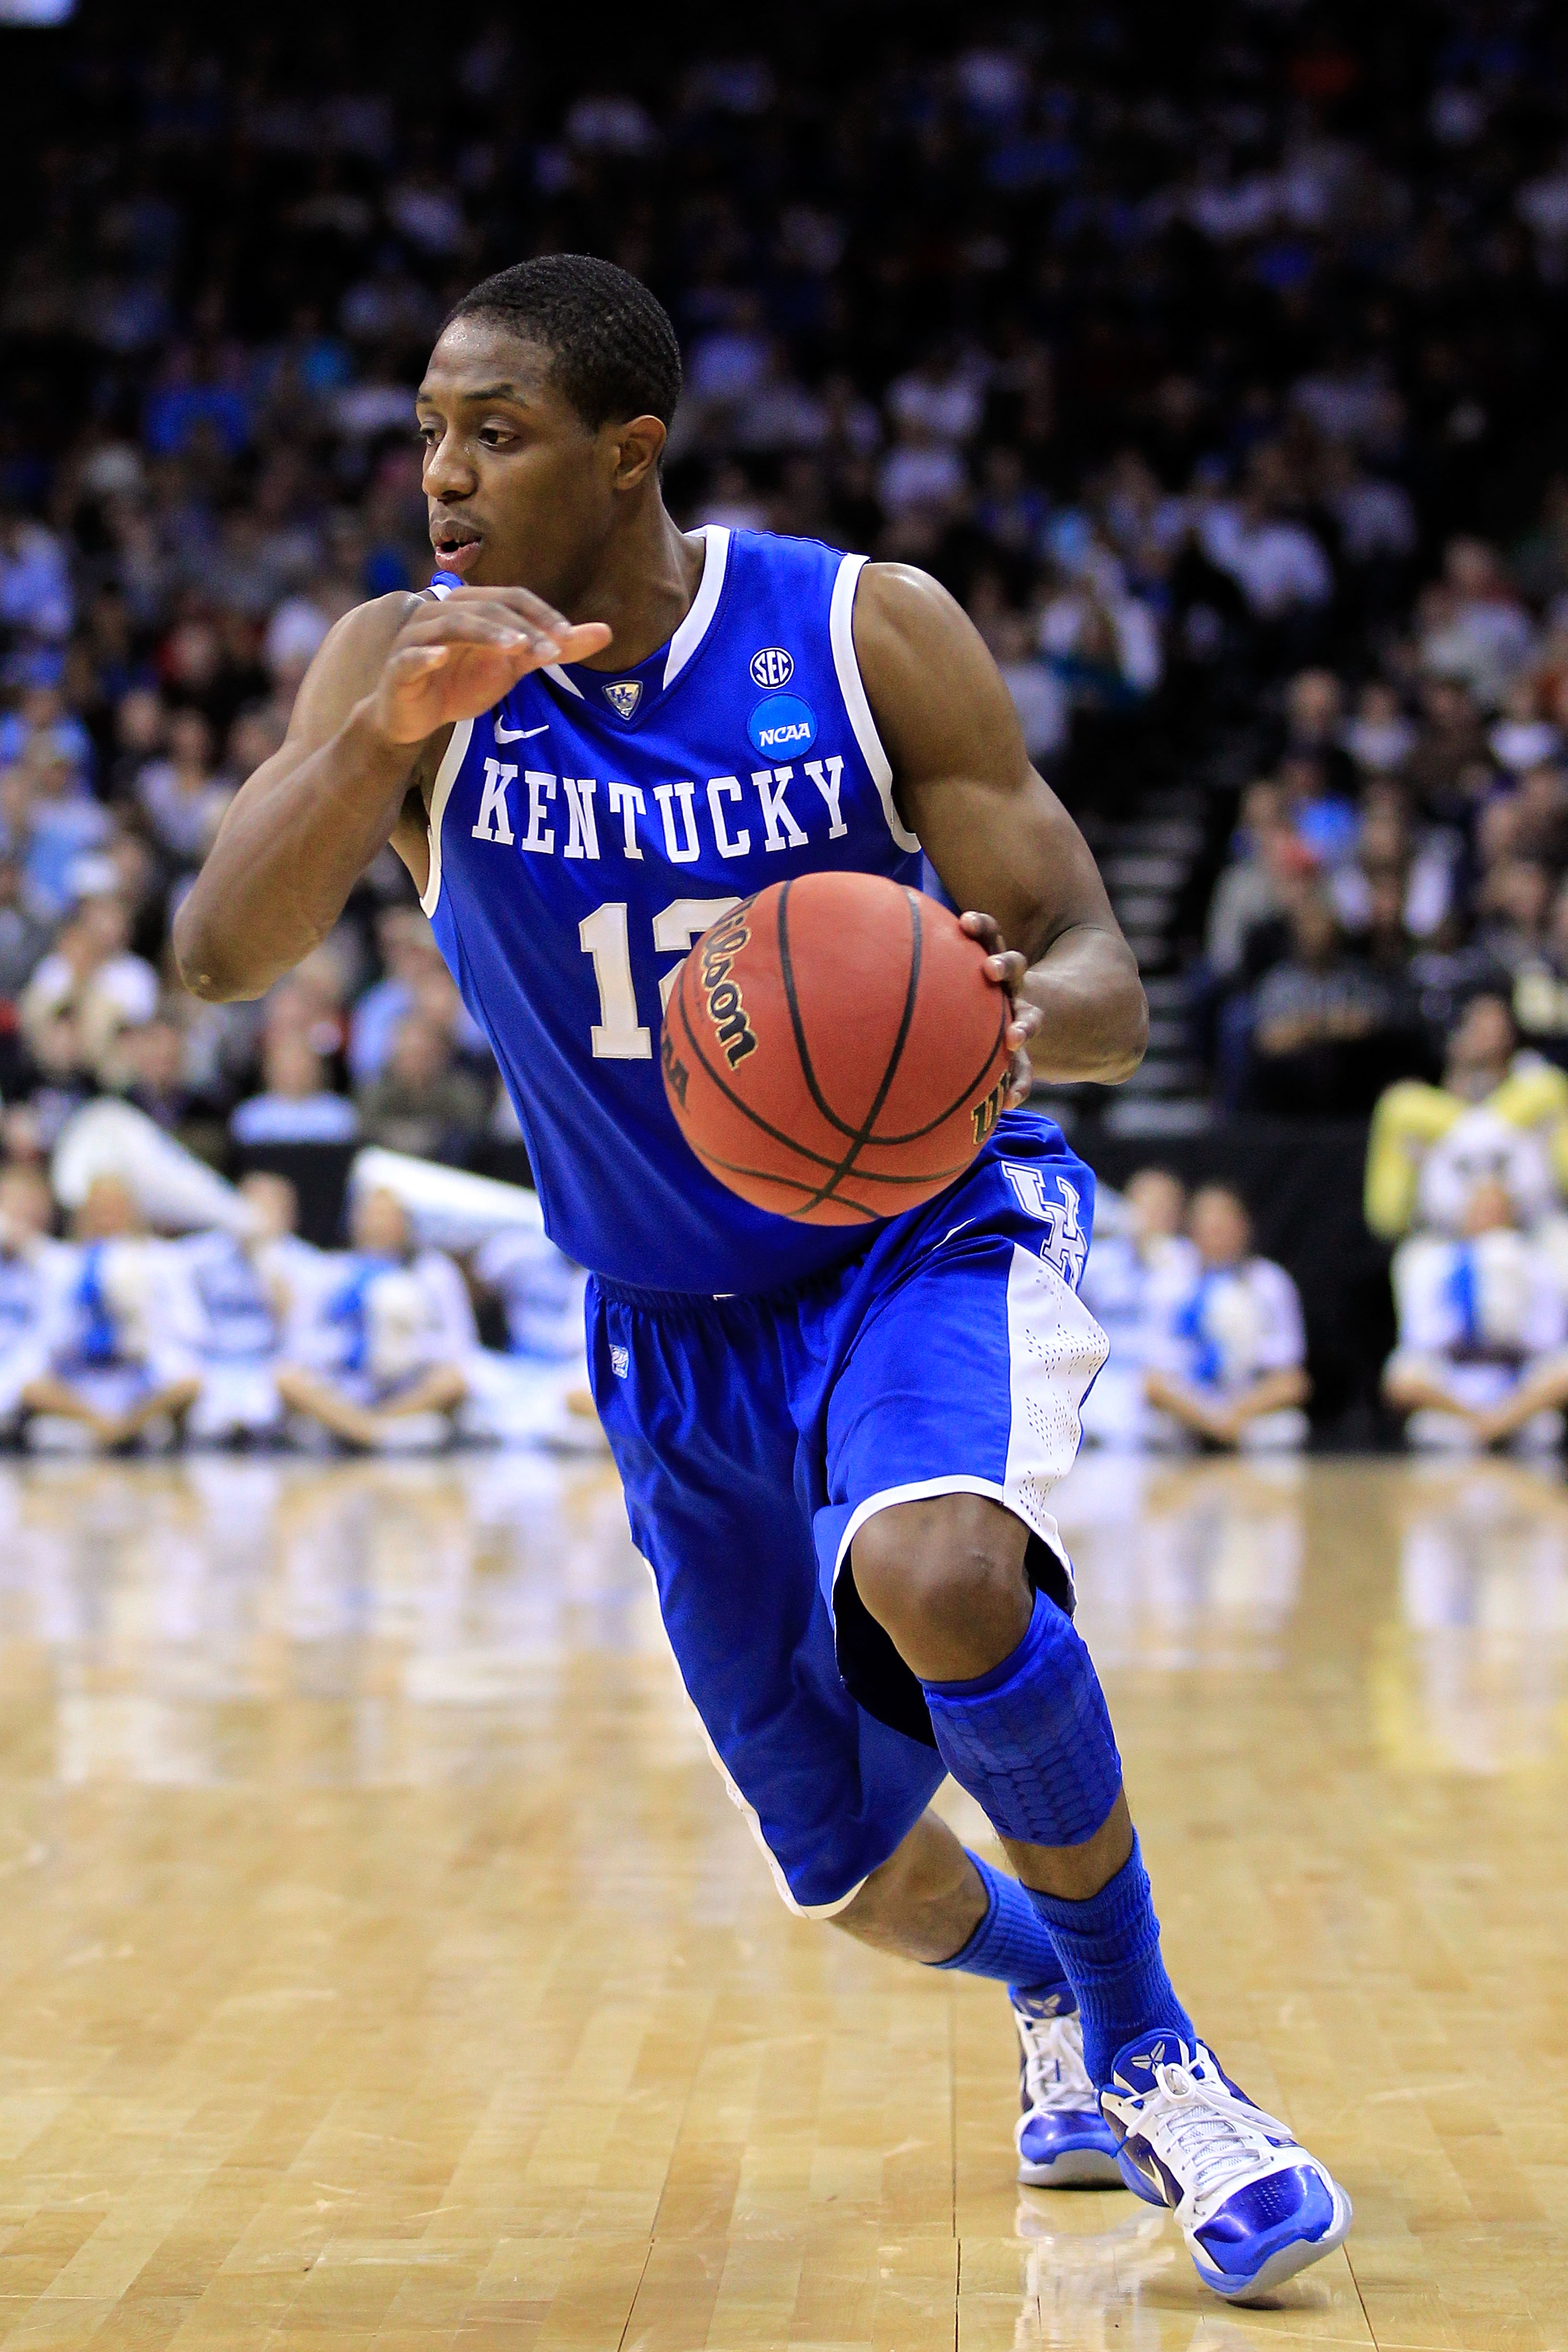 NEWARK, NJ - MARCH 27:  Brandon Knight #12 of the Kentucky Wildcats dribbles the ball against the North Carolina Tar Heels during the east regional final of the 2011 NCAA men's basketball tournament at Prudential Center on March 27, 2011 in Newark, New Je